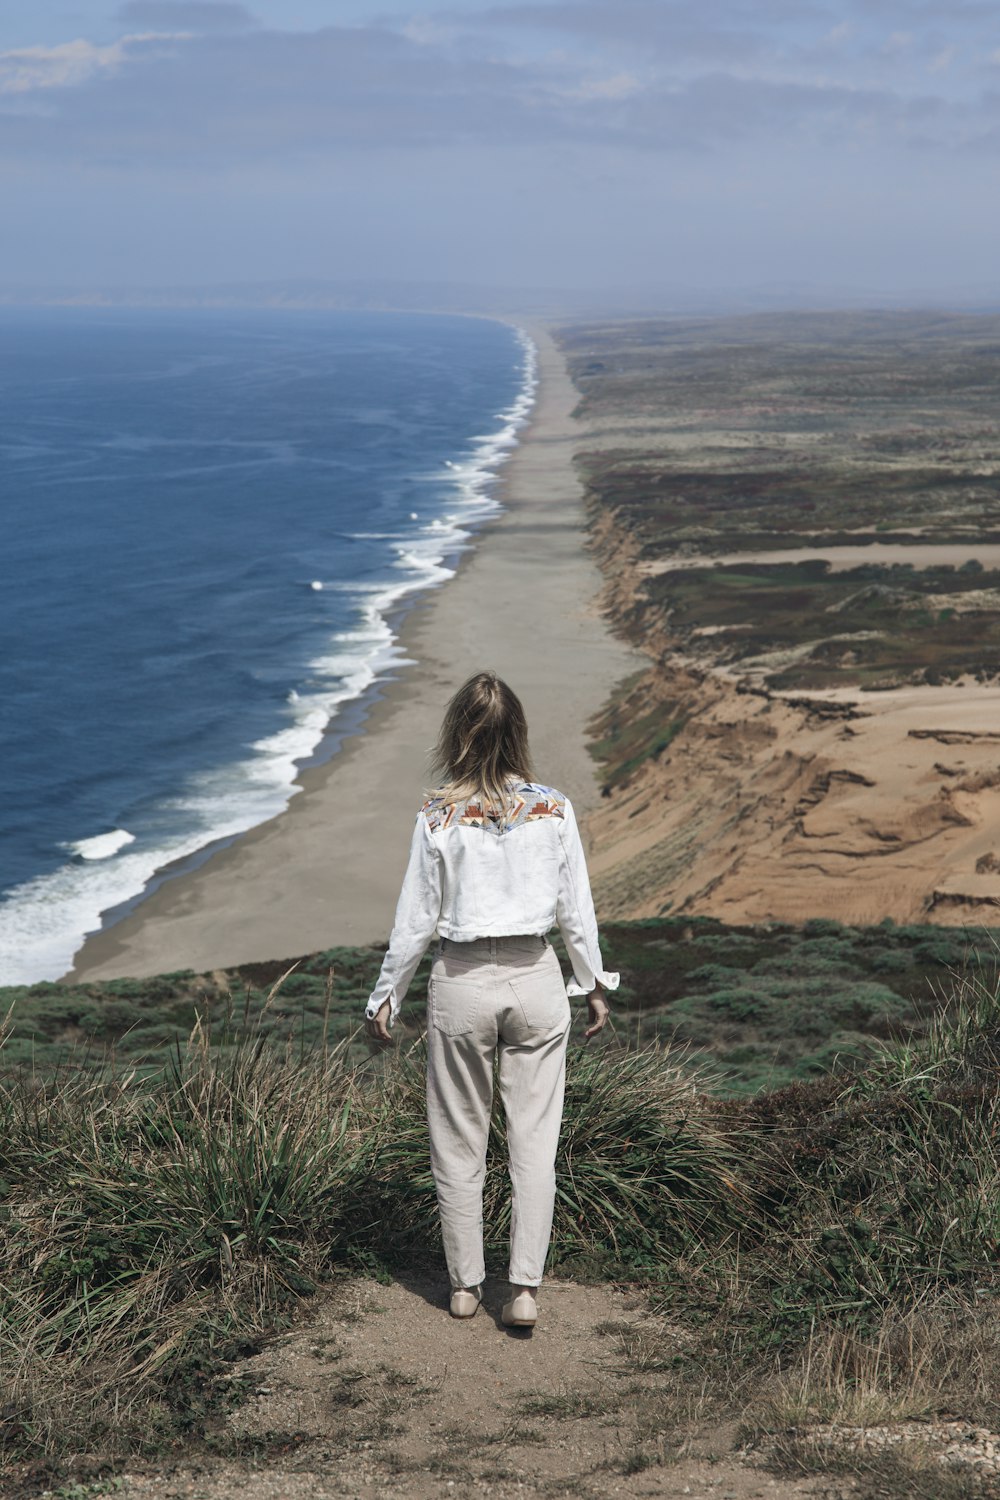 a person standing on a cliff overlooking a beach